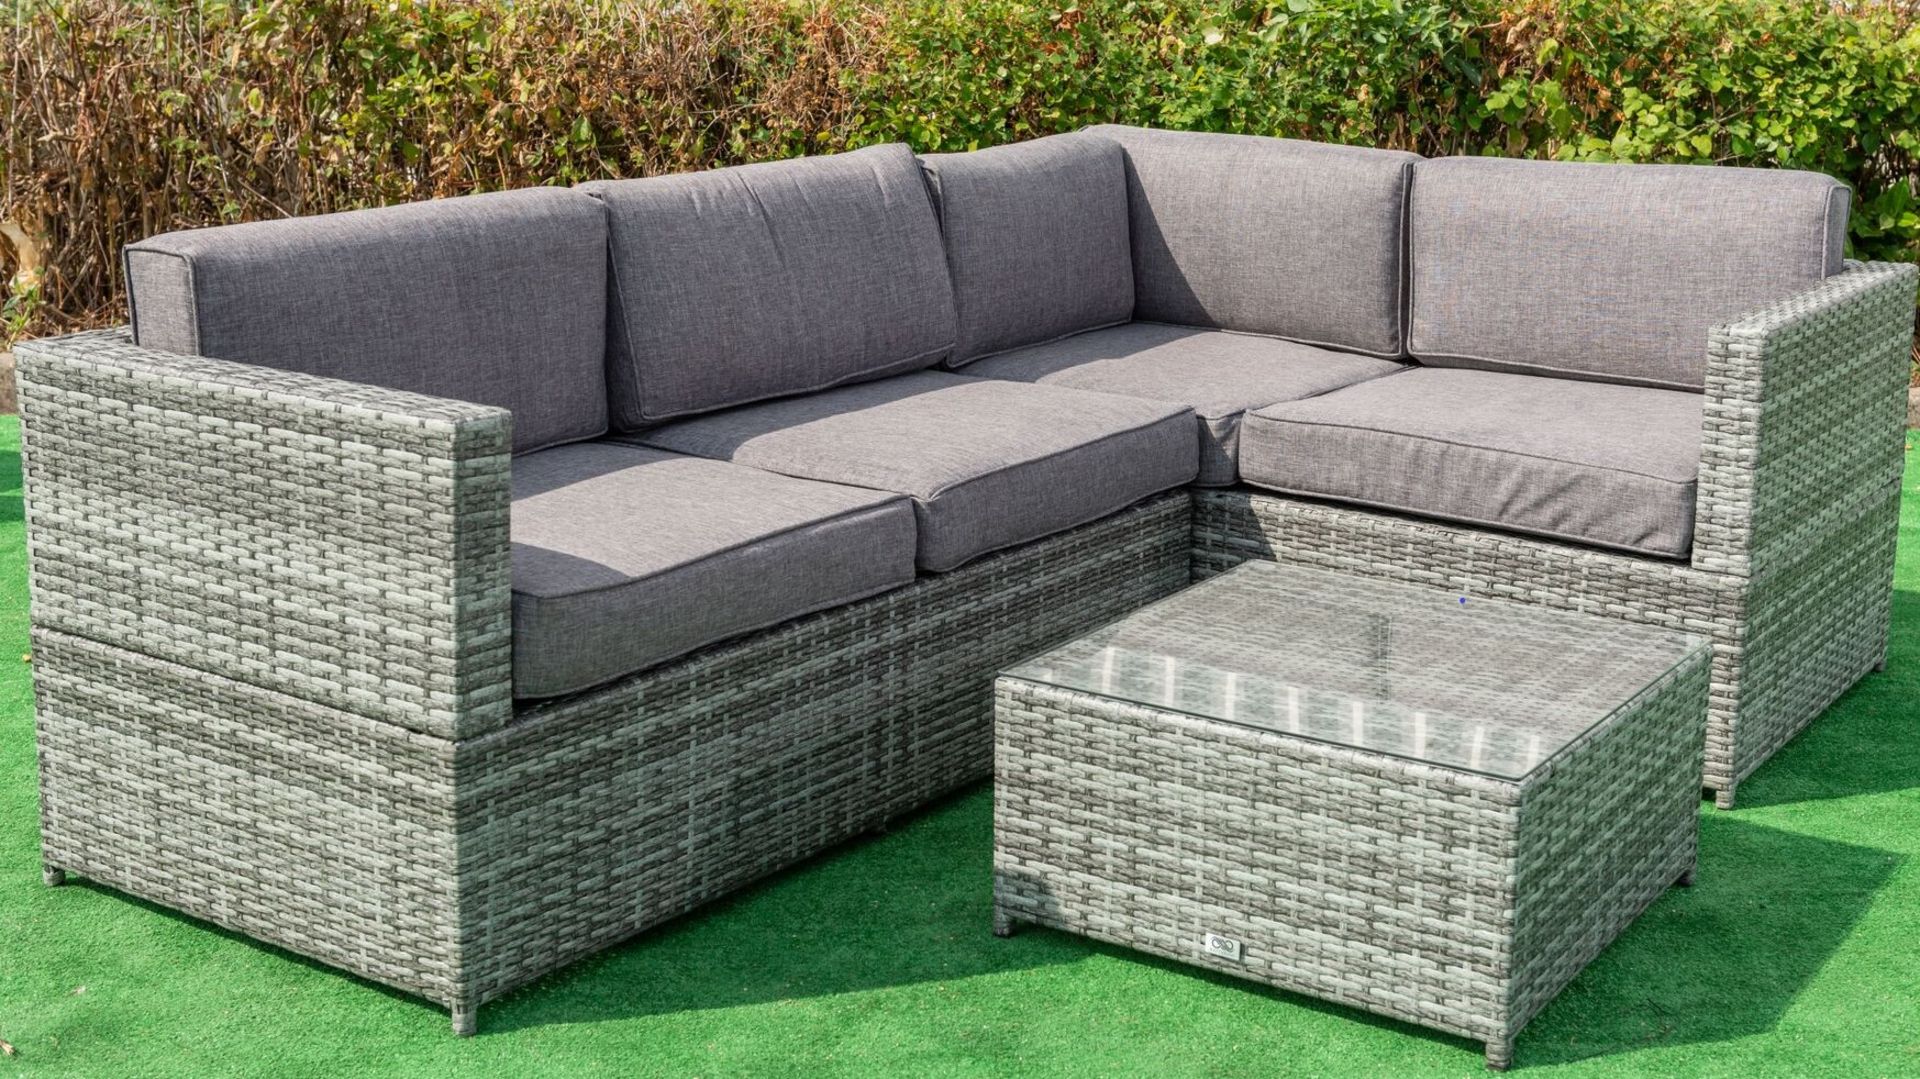 Newquay Corner Sofa Set in a Mixed Grey Pu Rattan with Contrasting Grey